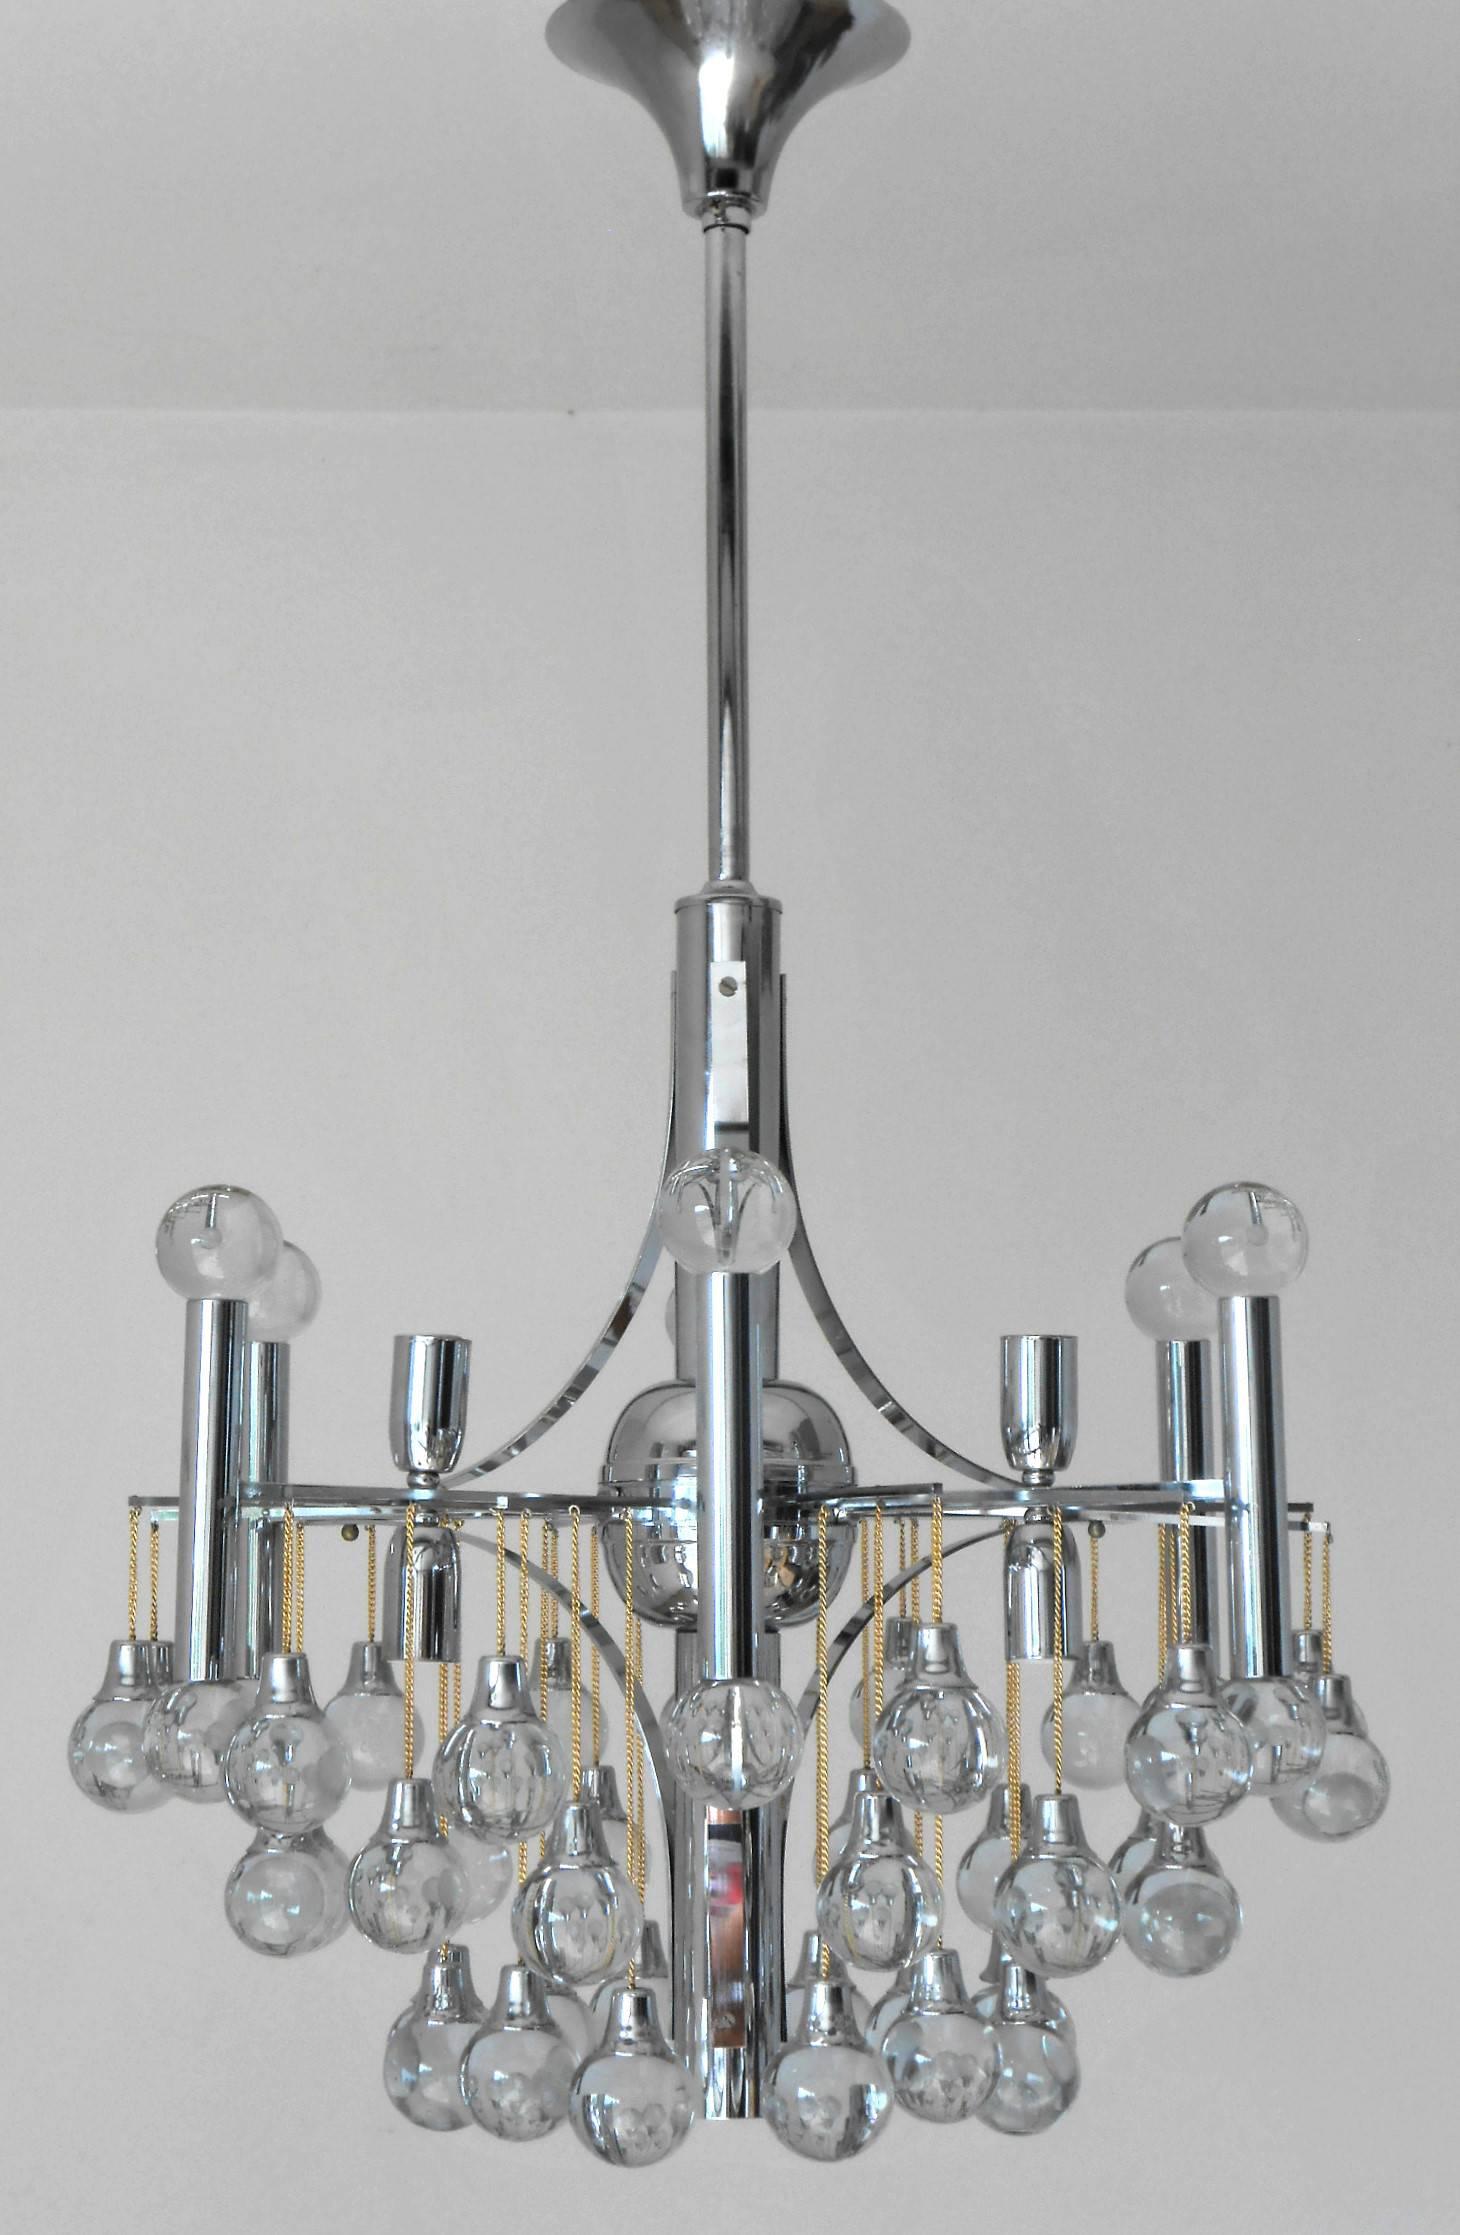 Vintage Italian chandelier with multiple glass spheres and chrome metal frame / Designed by Sciolari circa 1970’s / Made in Italy 
6 lights / E12 or E14 type / max 40W each
Diameter: 21.5 inches / Height: 35.5 inches
1 in stock in Palm Springs